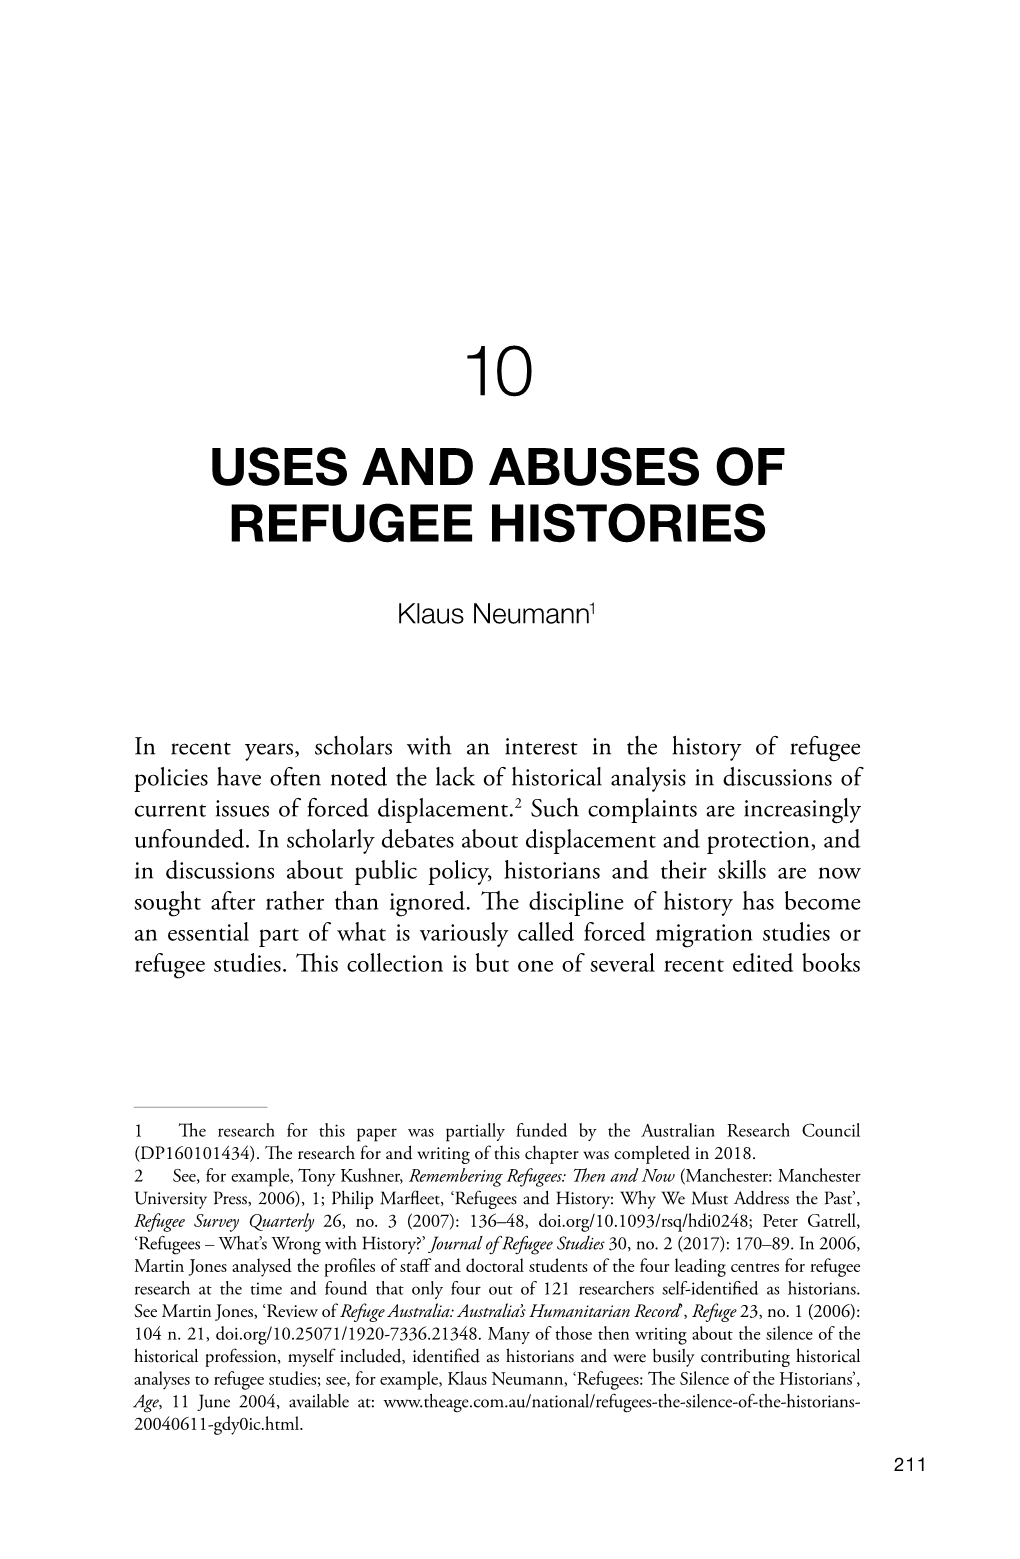 10. Uses and Abuses of Refugee Histories